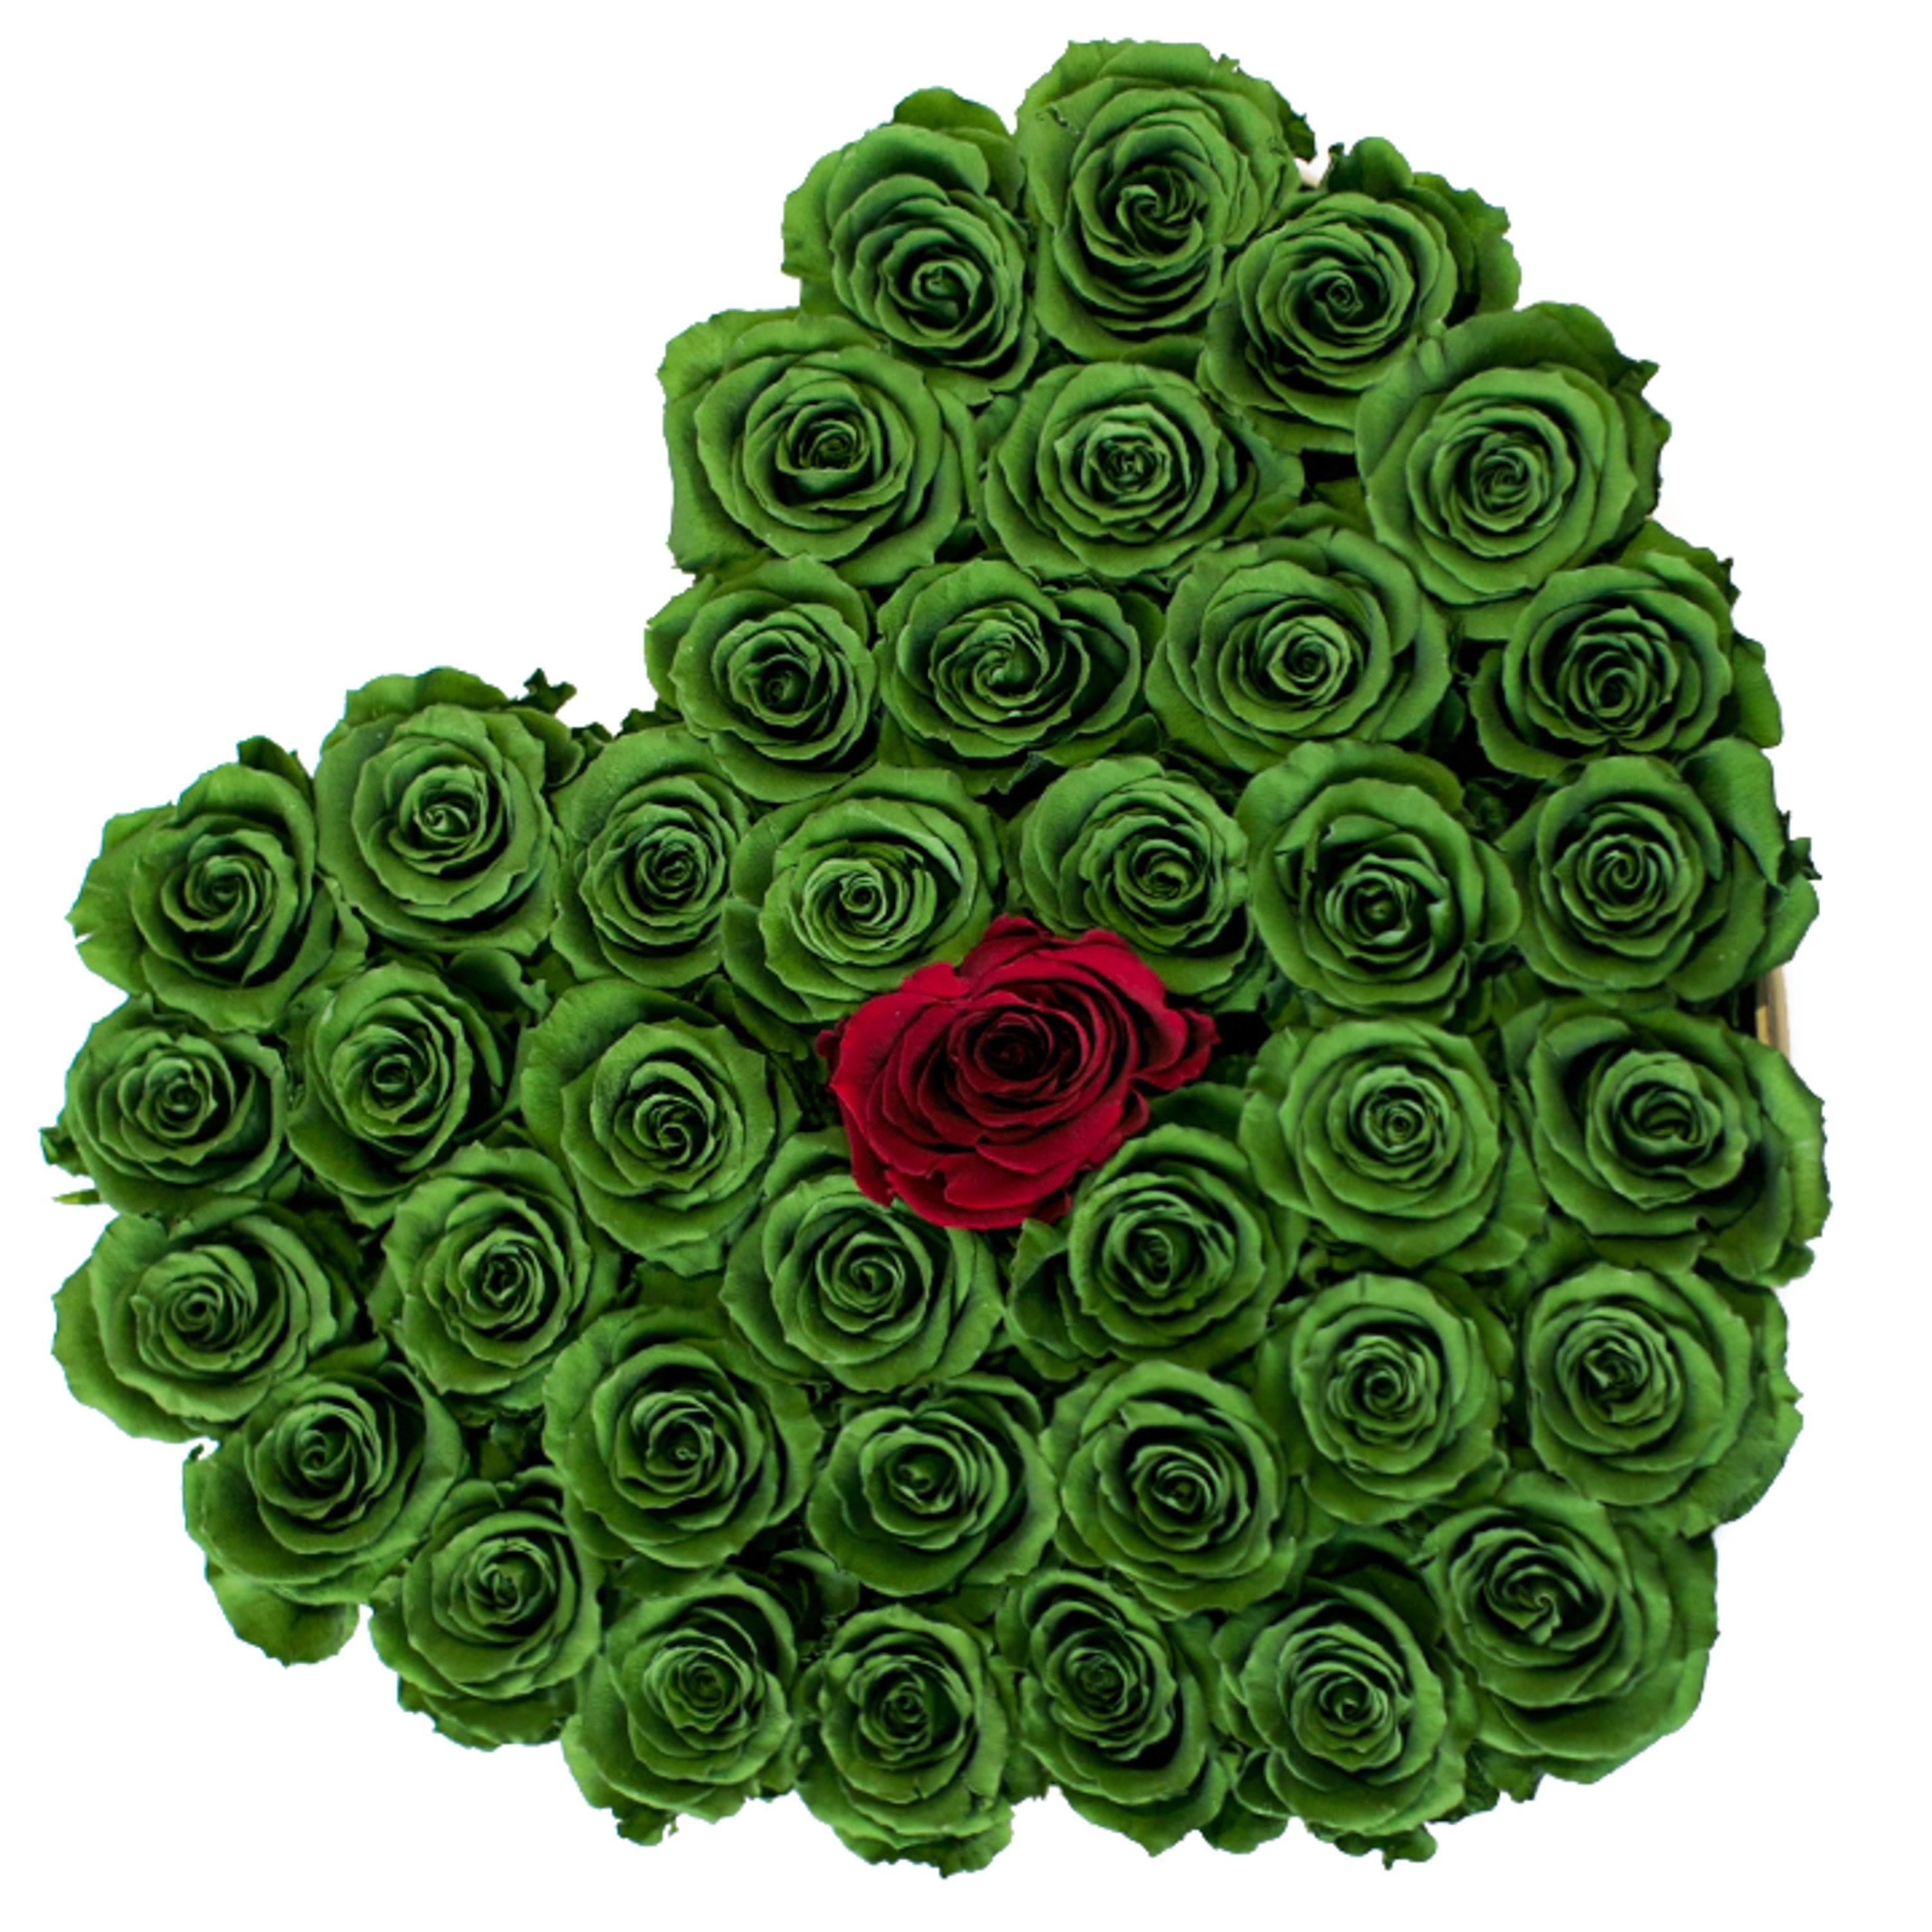 LOVE box - gold - emerald-green&red roses red eternity roses - the million roses